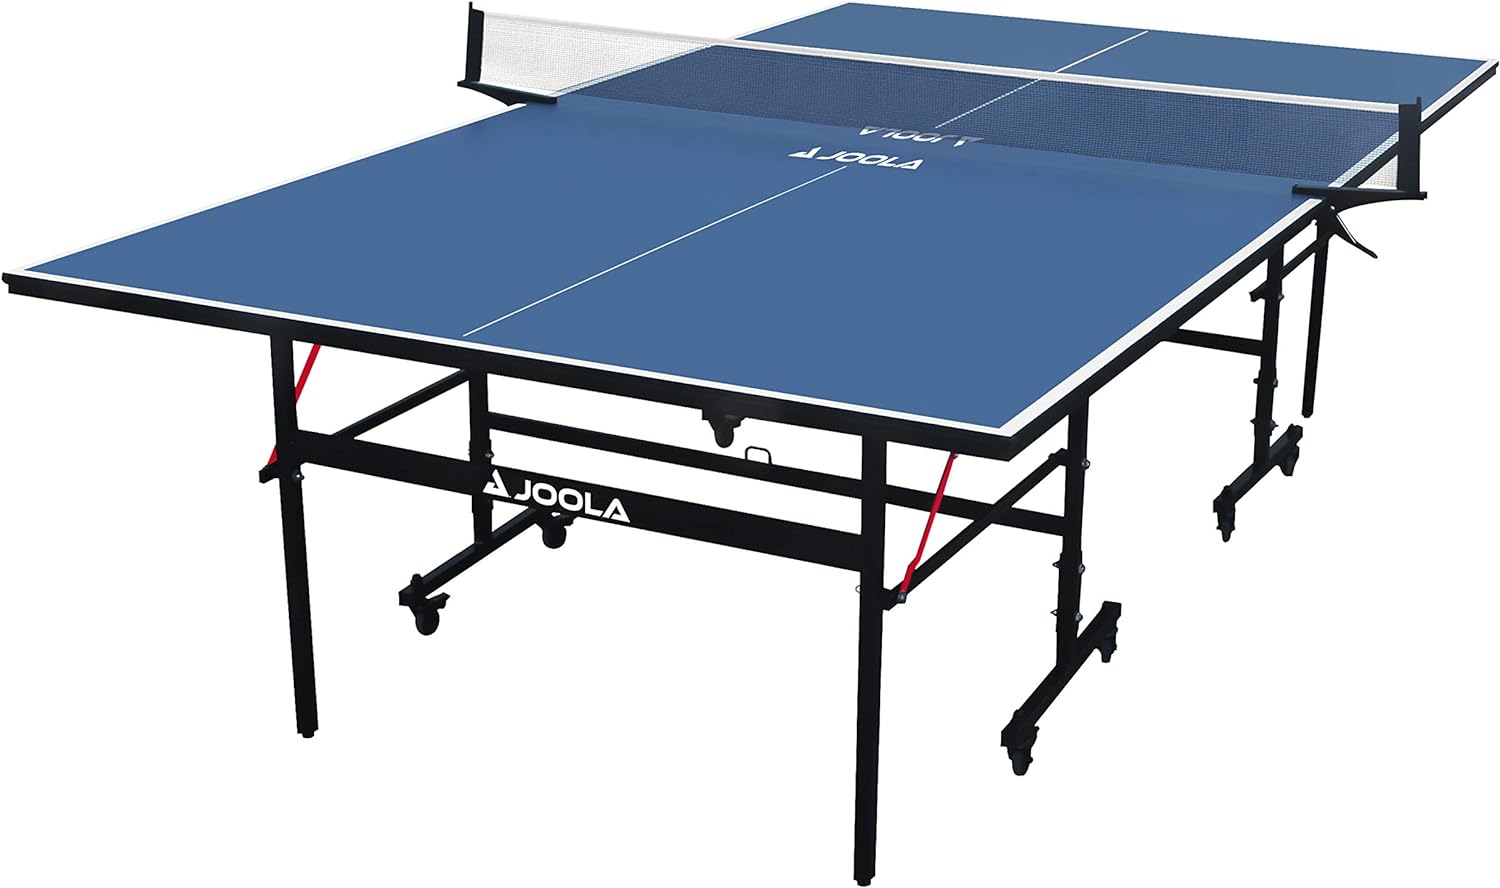 How To Assemble A Ping Pong Table